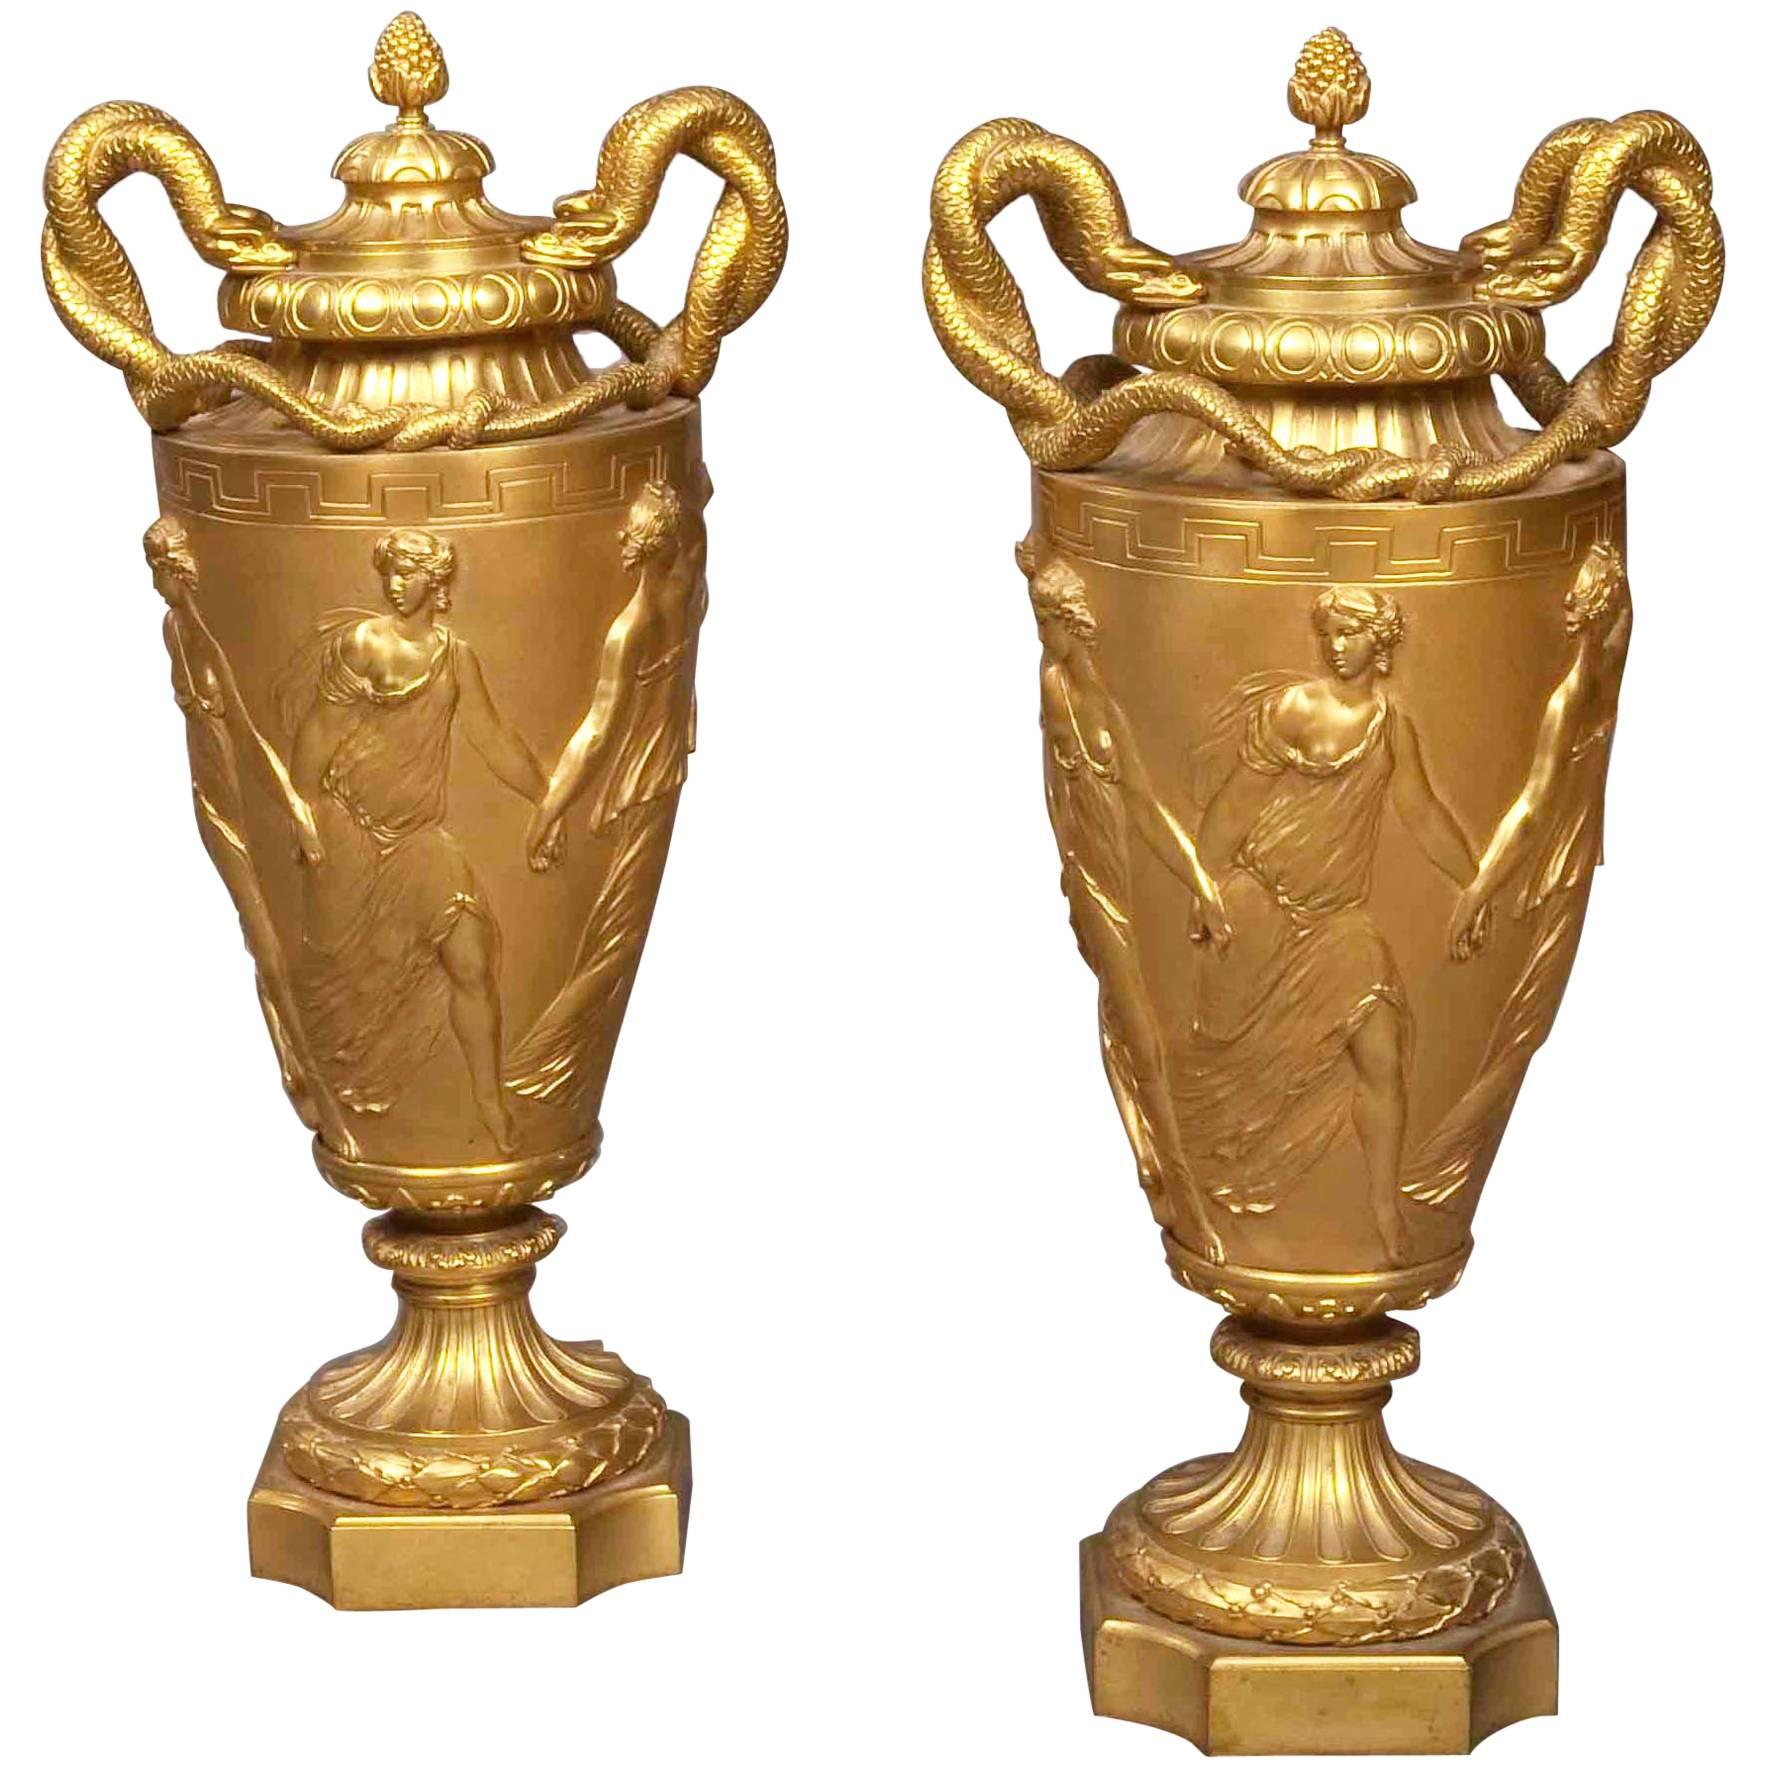 Pair of French Gilt Bronze Urns with Classical Italian Scenes